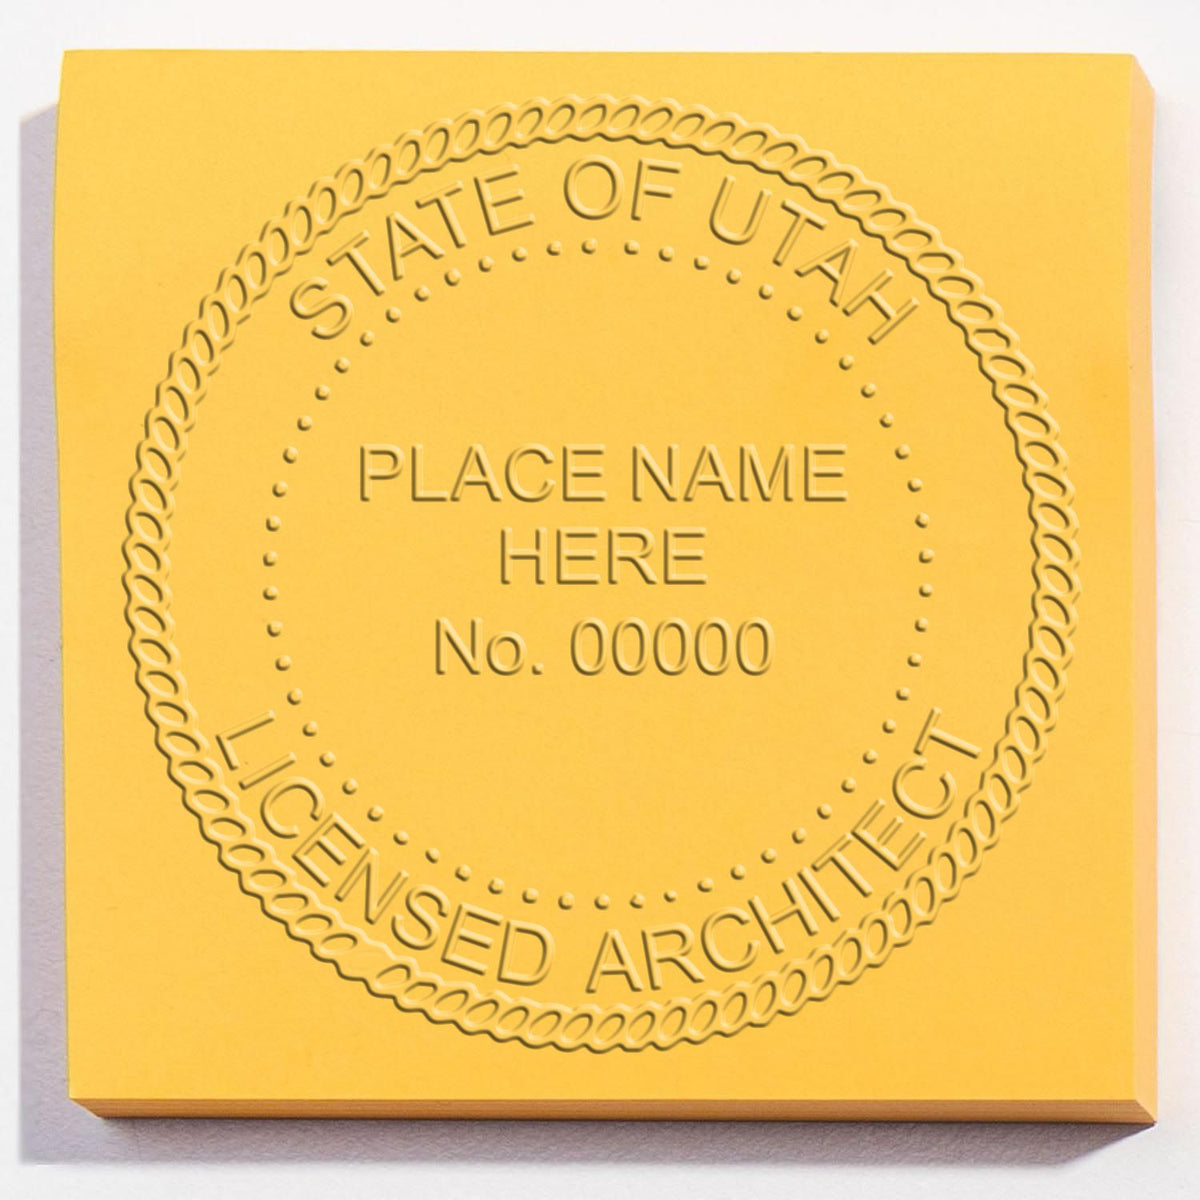 The Gift Utah Architect Seal stamp impression comes to life with a crisp, detailed image stamped on paper - showcasing true professional quality.